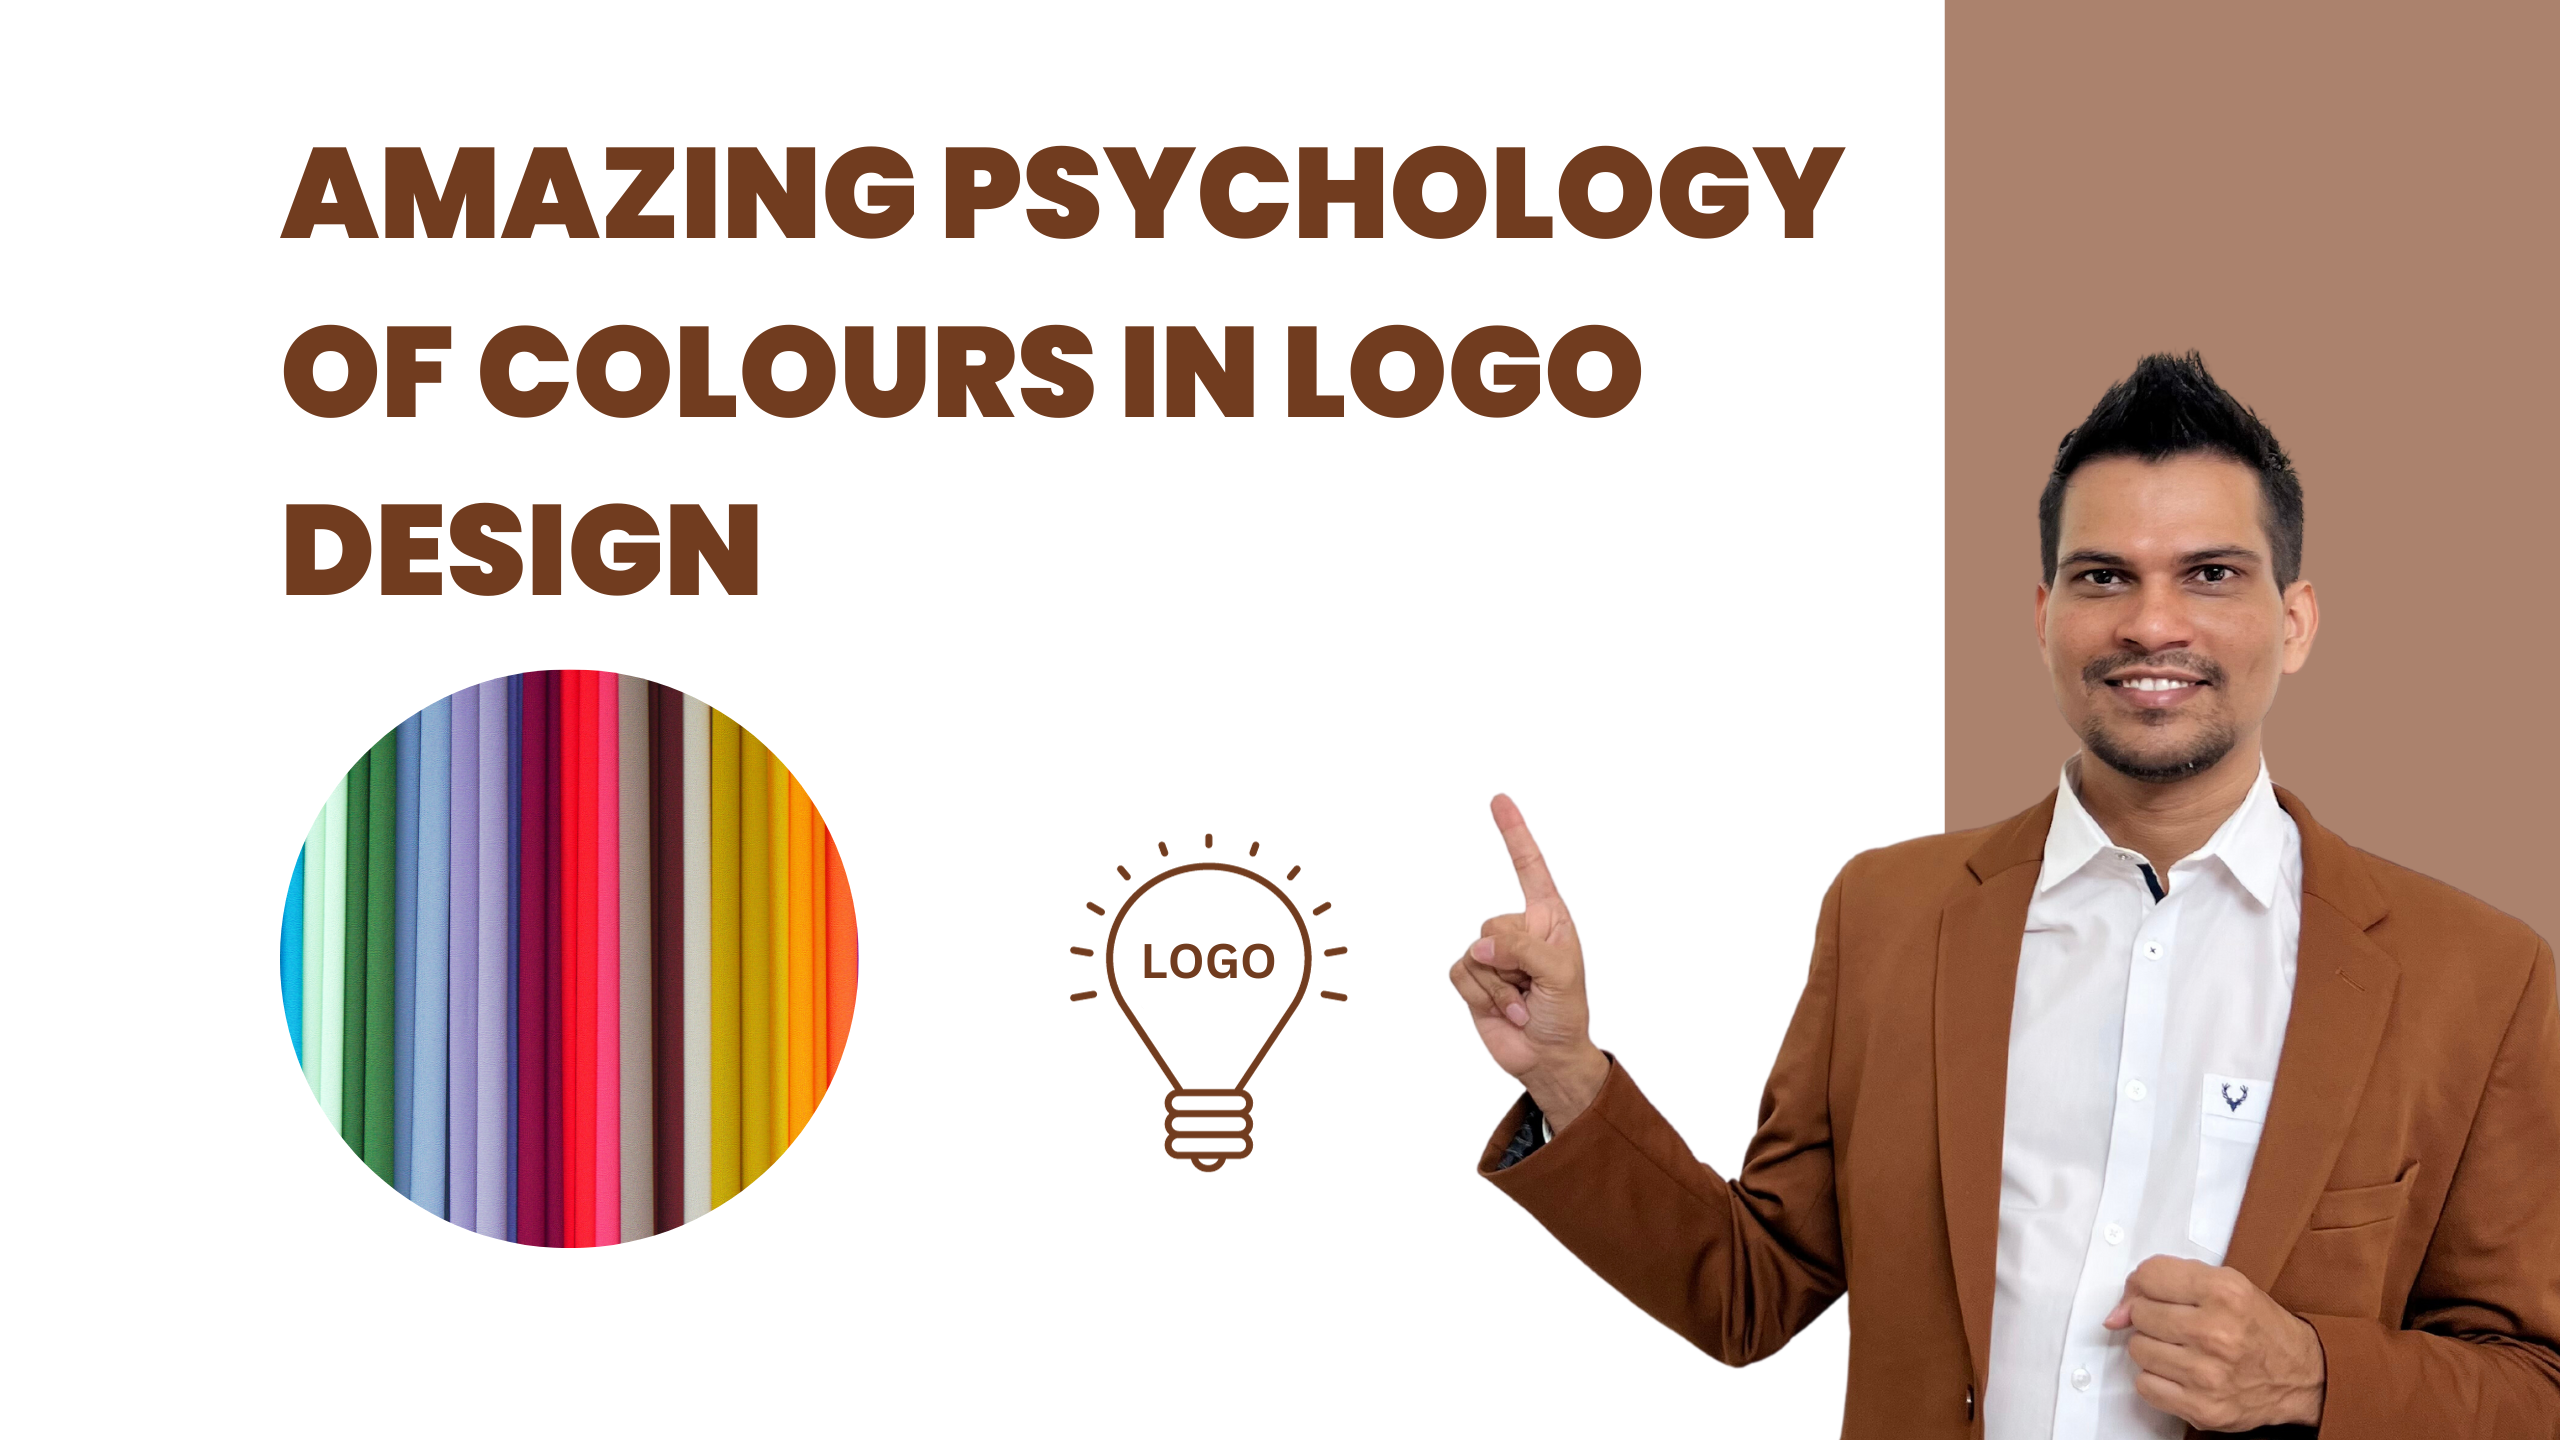 AMAZING Psychology of Colours in Logo Design